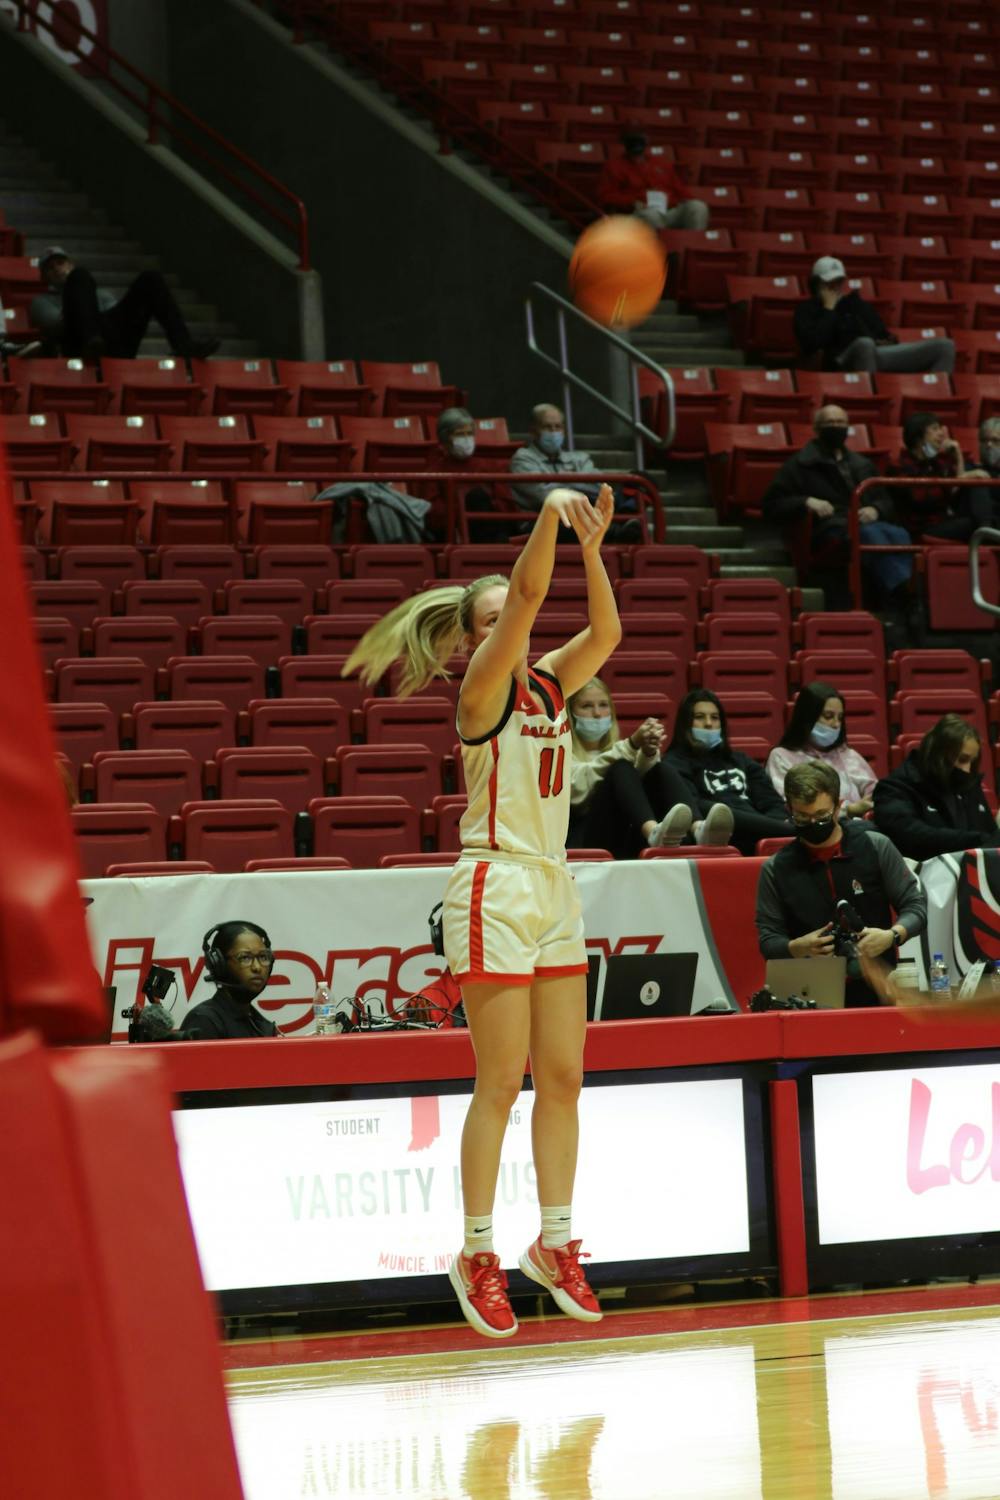 Fans help bring ‘another level’ in Ball State's exhibition win over Oakland City